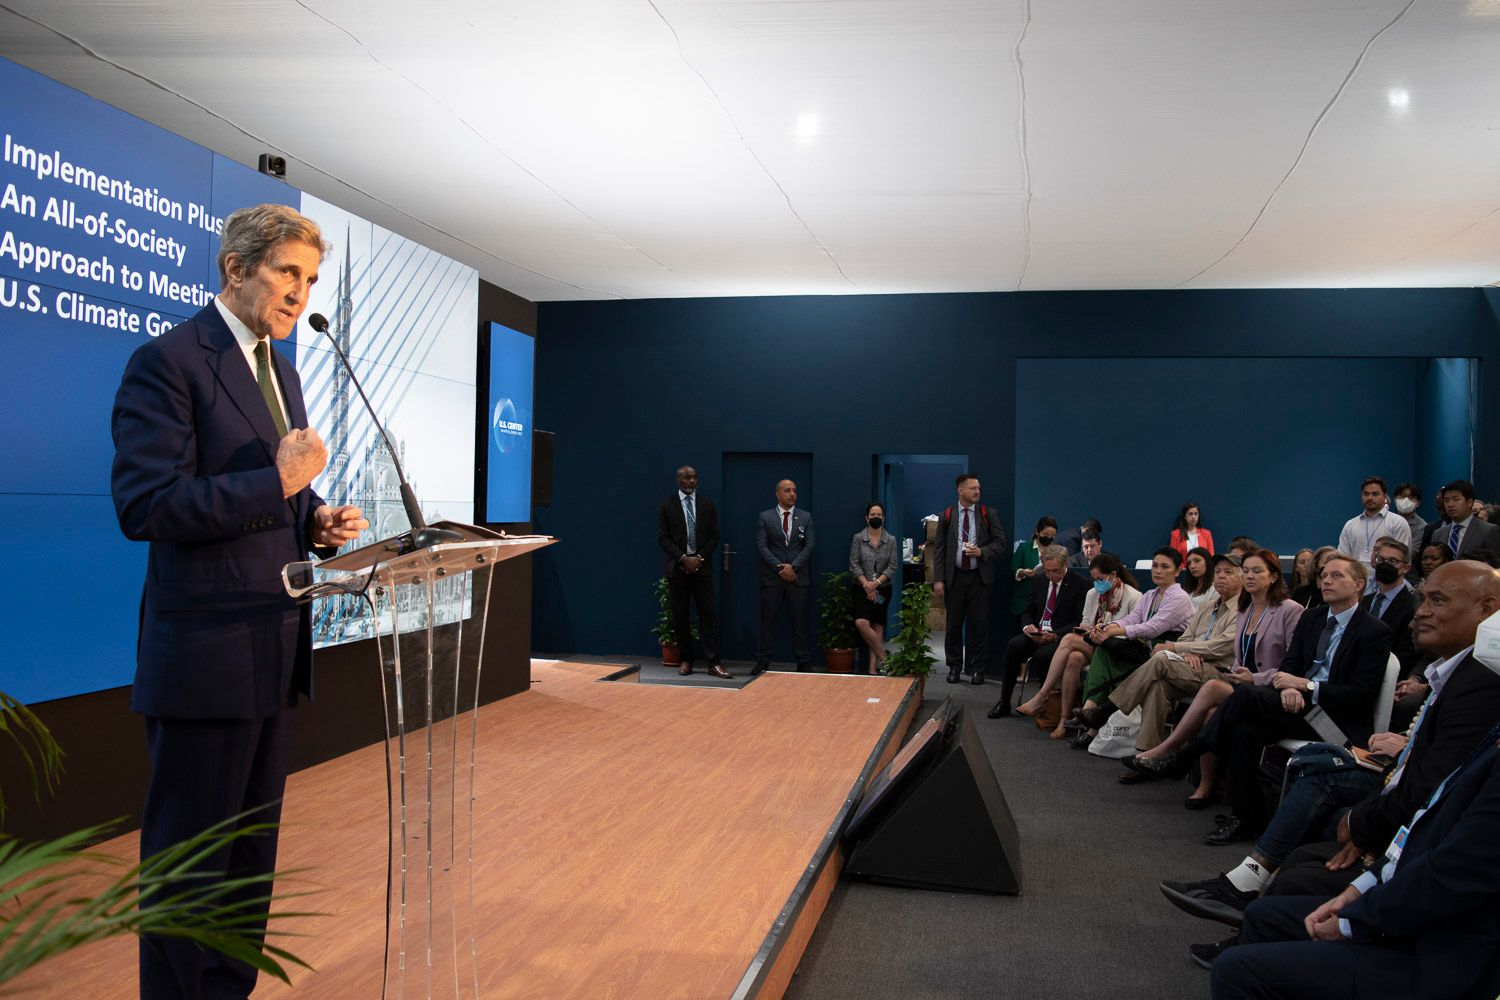 United States Special Presidential Envoy for Climate John Kerry gives introductory remarks at the official opening for the U.S. pavilion at COP27 in Sharm el Sheikh, Egypt, in November 2022. (Courtesy of Kate Fenske)